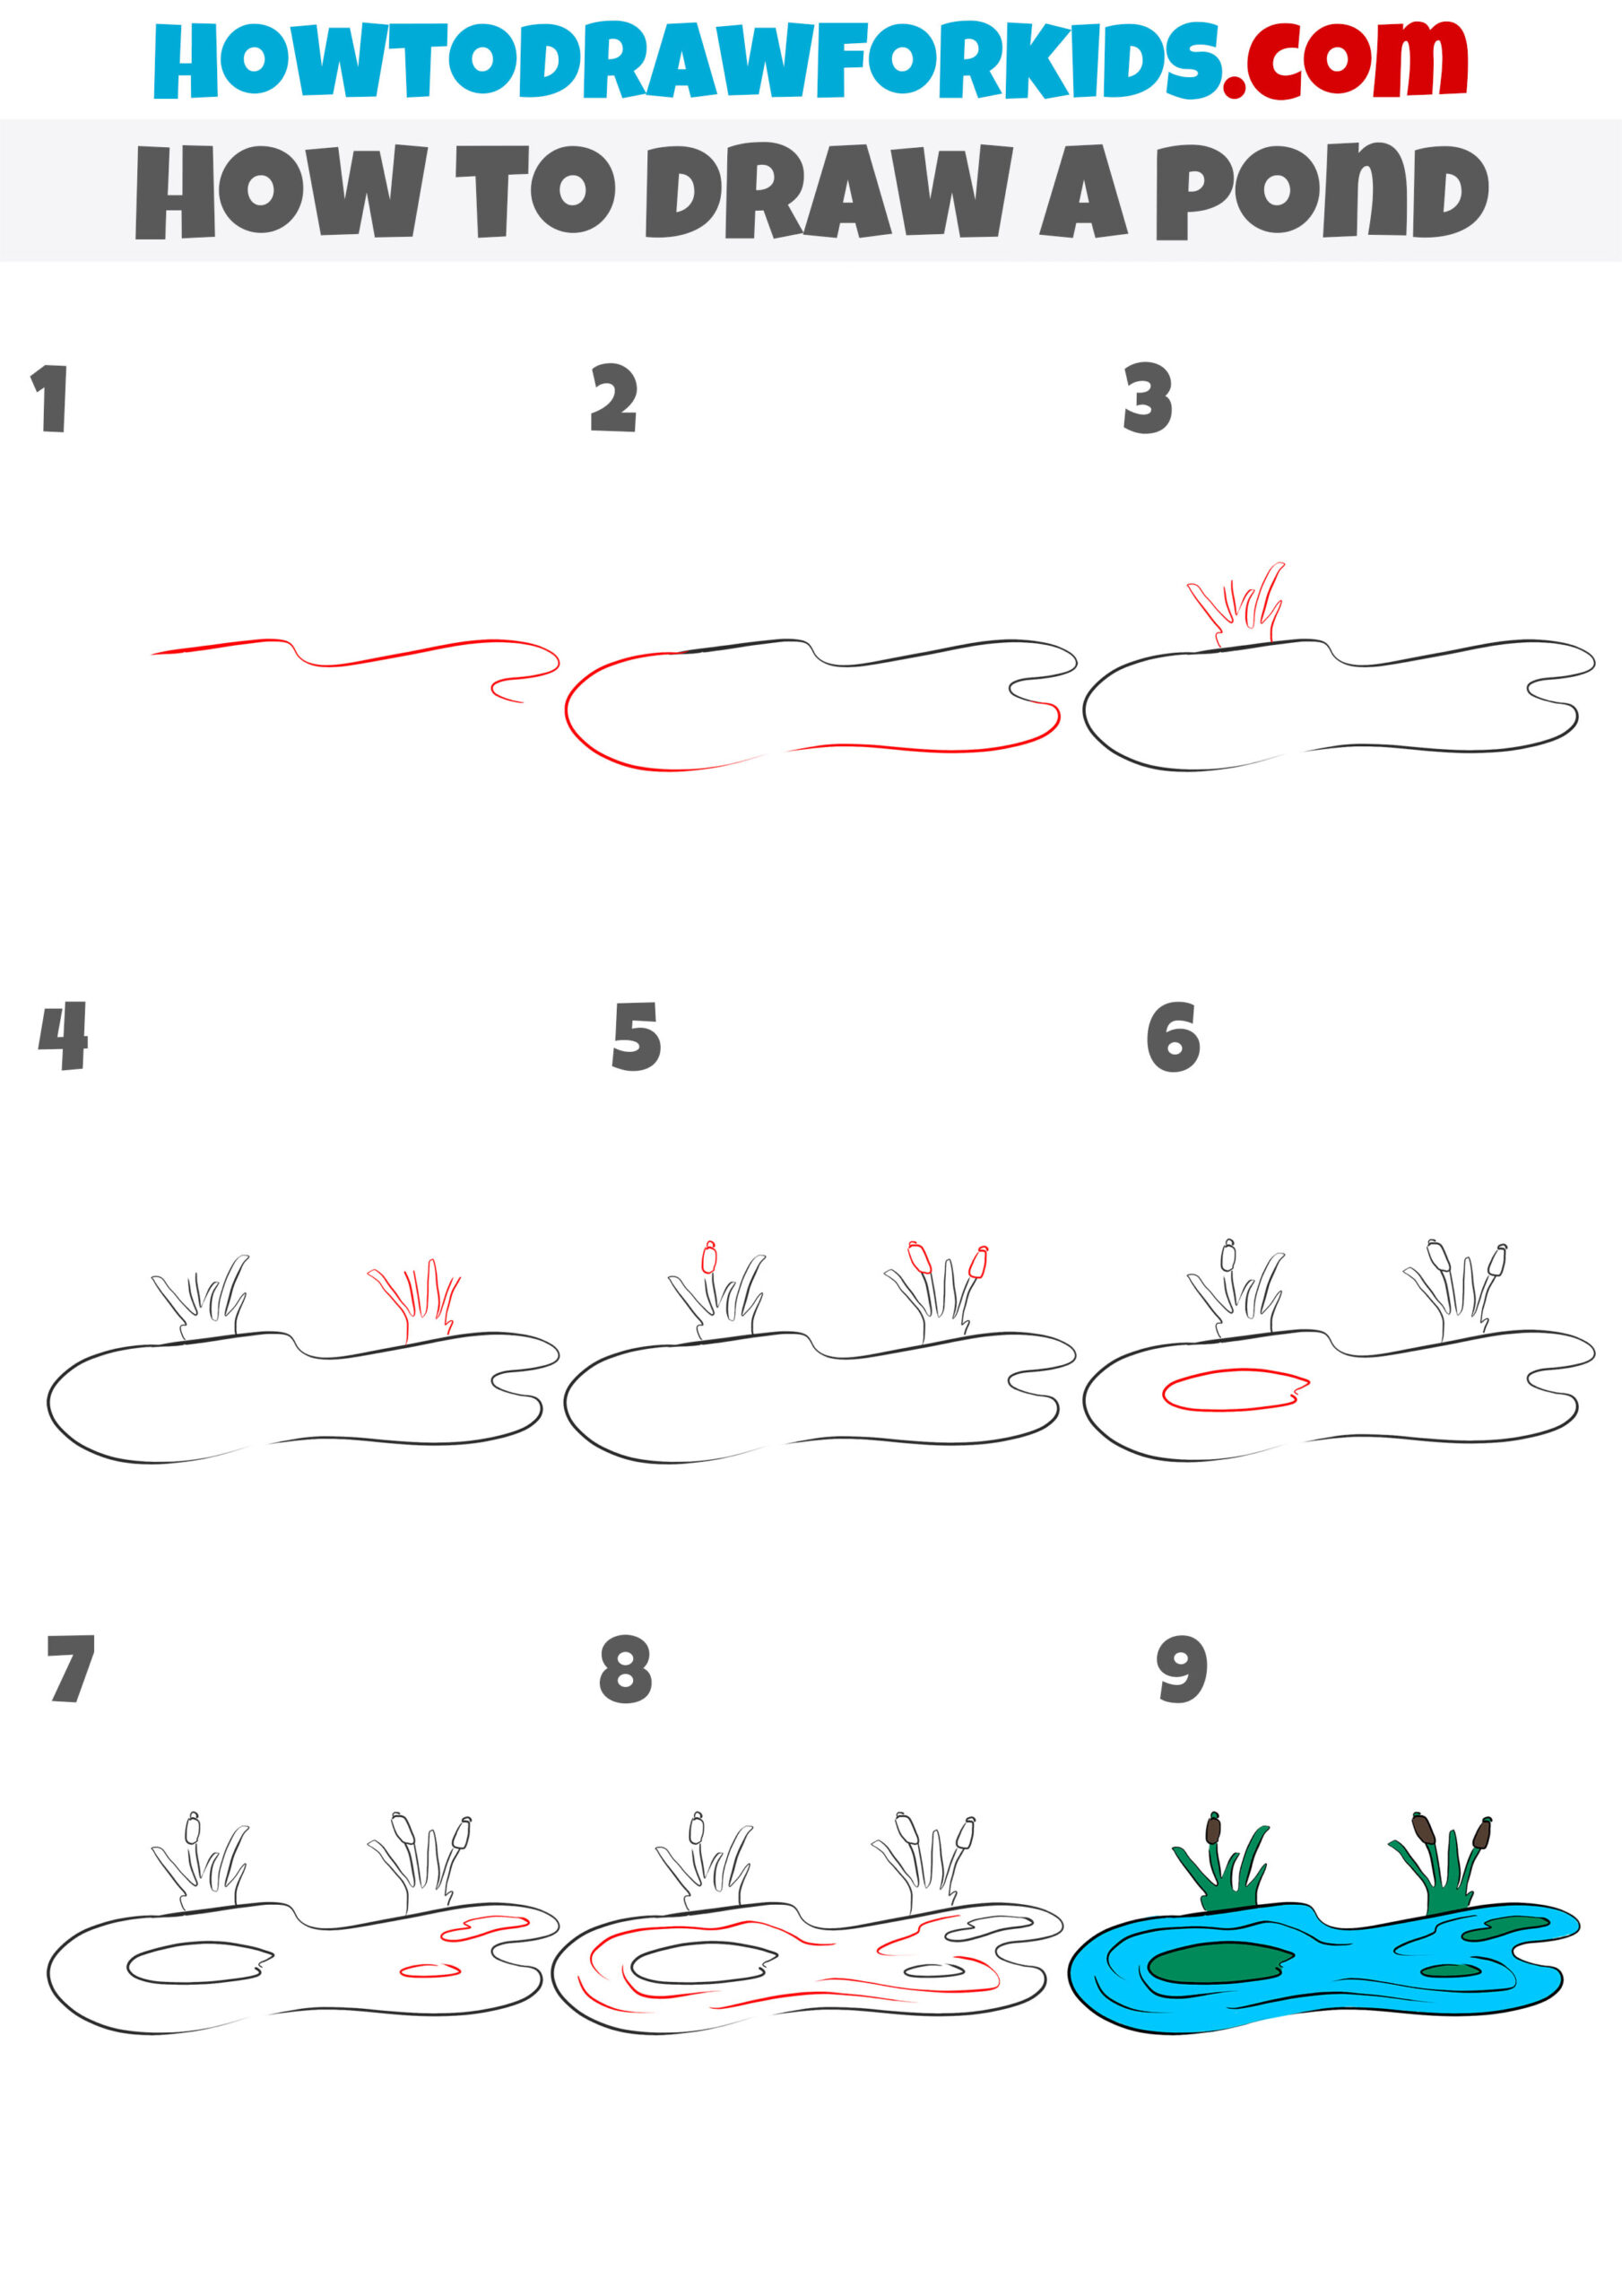 how to draw a pond step by step